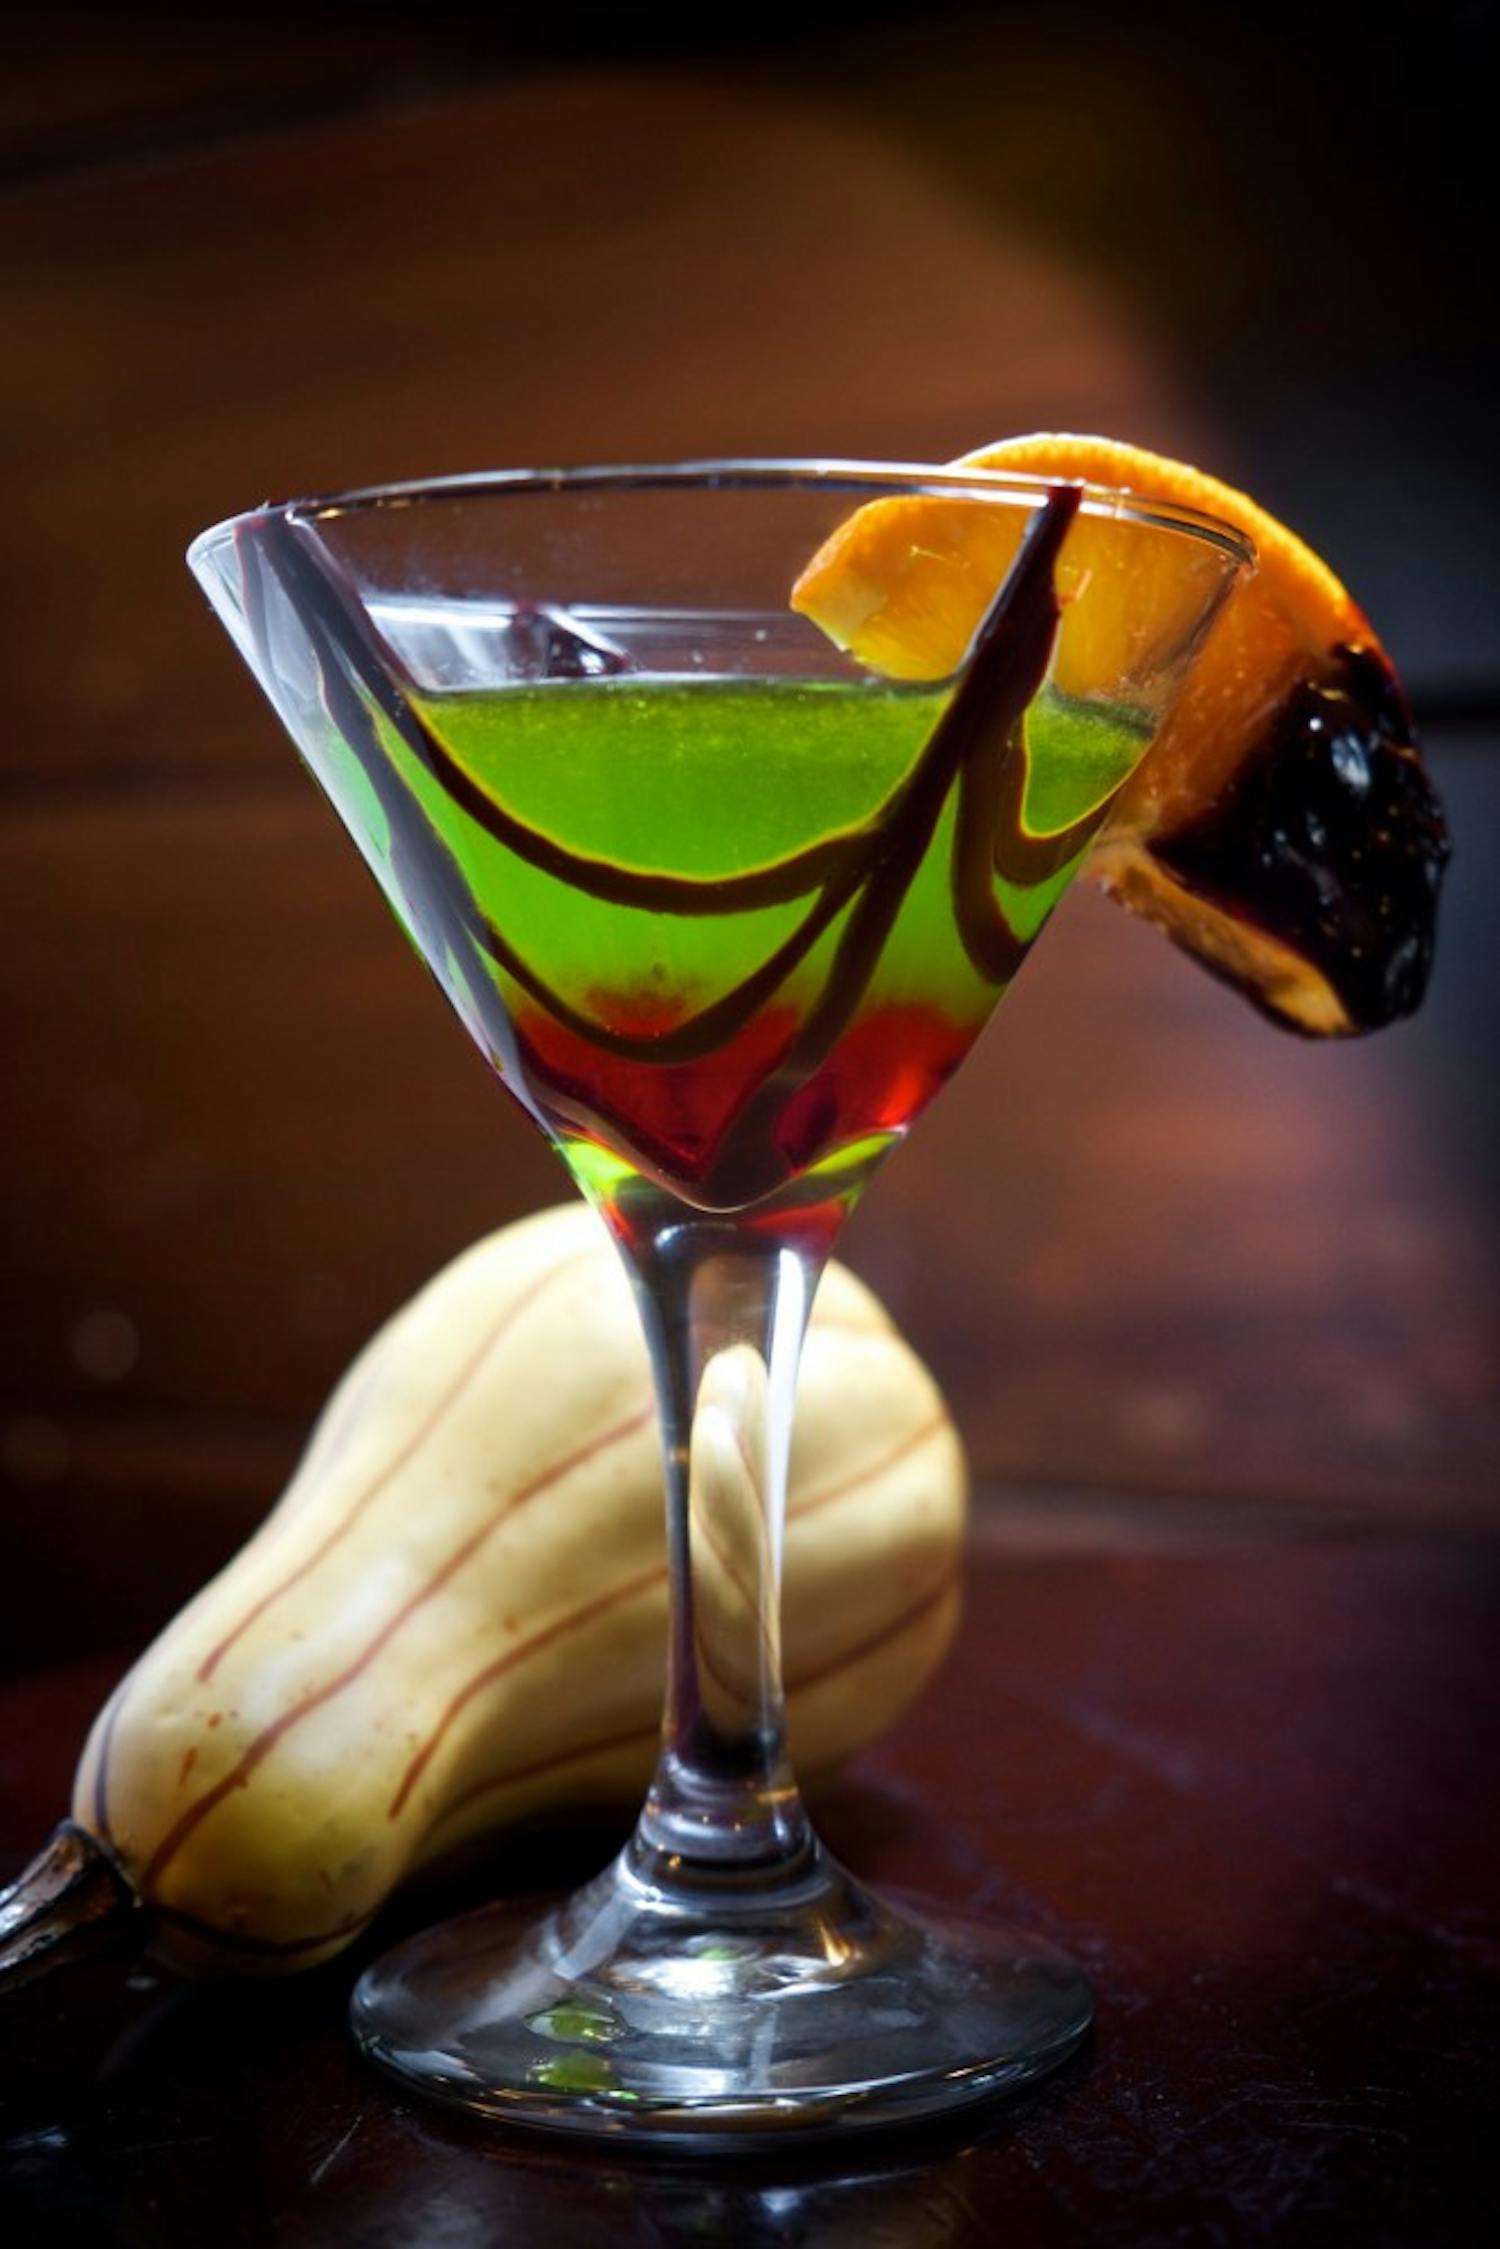 You’re bound to get thirsty while party hopping this weekend. Shots? Cocktails? Beer? The Spectrum compiled a list of some sweet and colorful cocktails to aid any outing and setting this Halloween weekend.